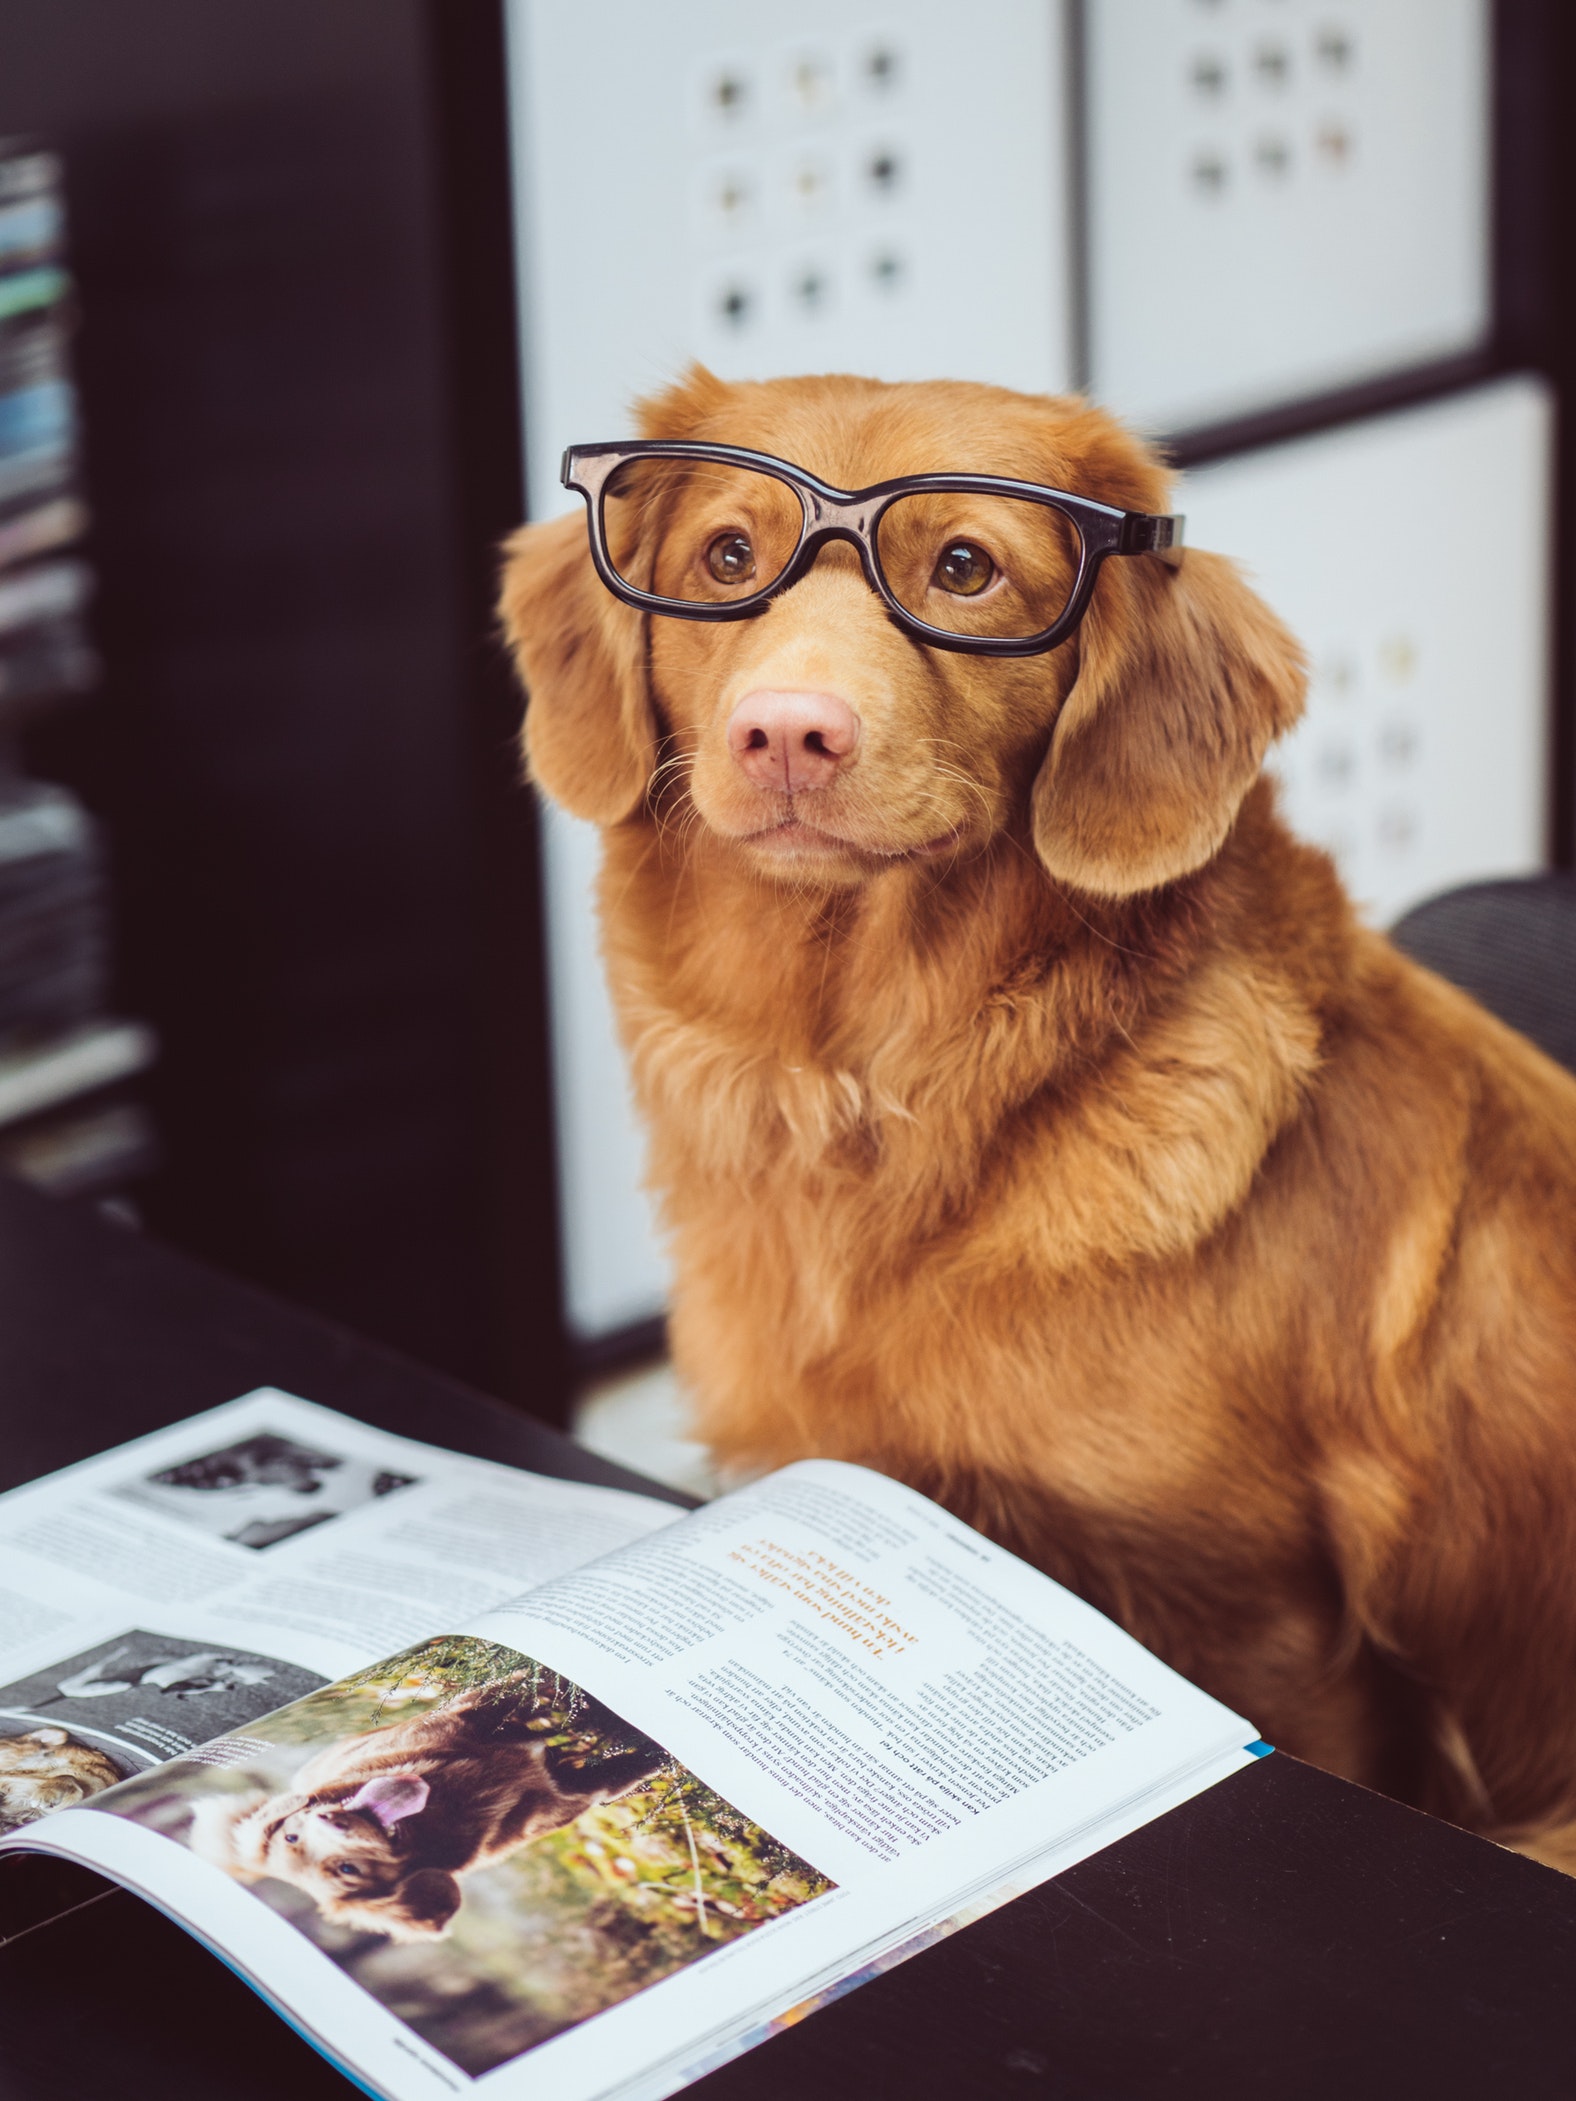 Brown dog wearing glasses sitting with a book